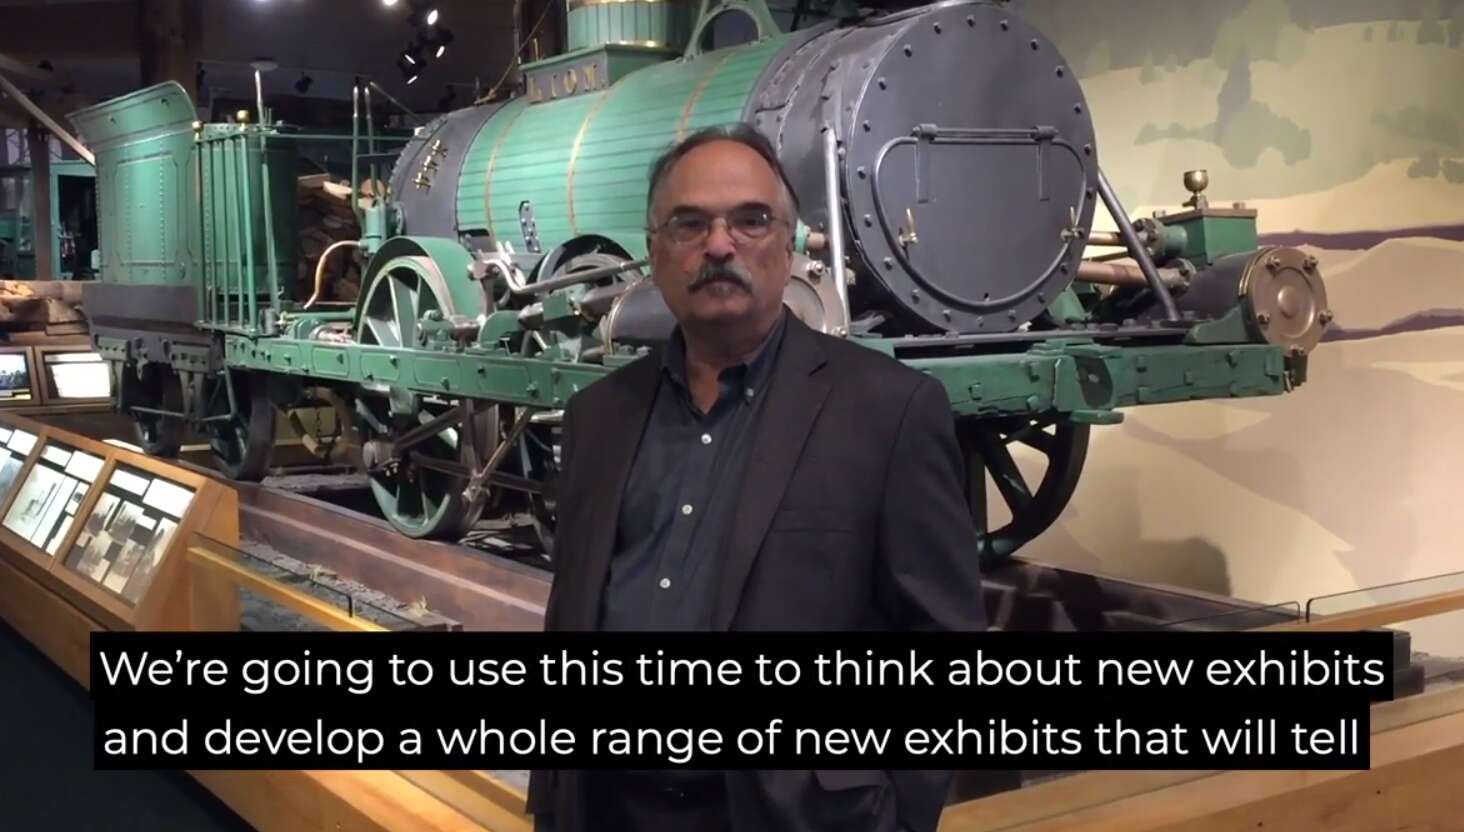 A man standing in front of a display of an old train engine and words on the screen that say we're going to use this time to think about new echibits and develop and wholr range of new exhibits